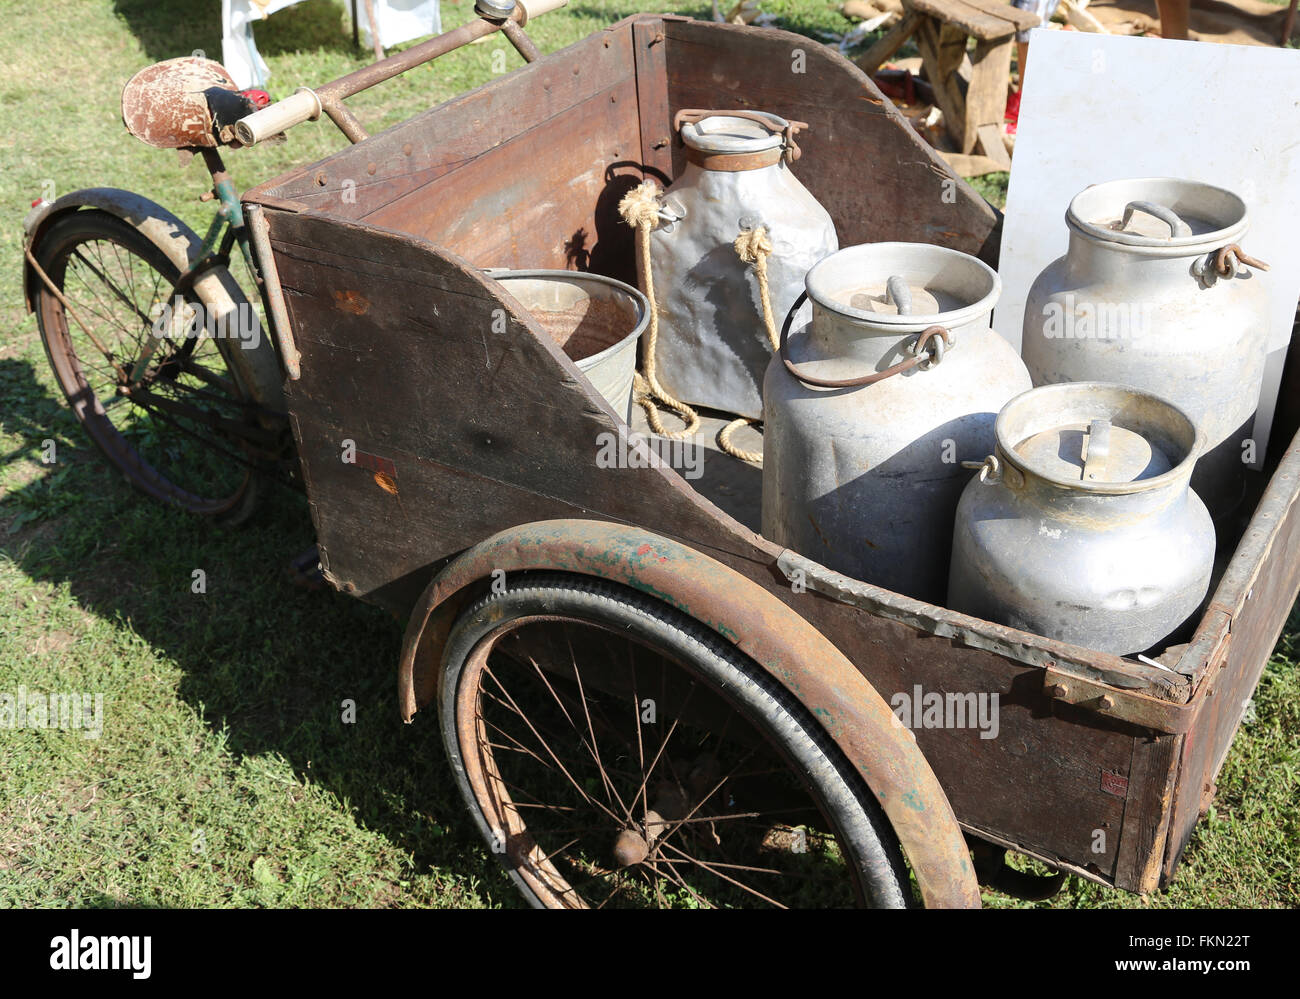 ancient big bicycle with cart with three wheels for transporting milk cans Stock Photo